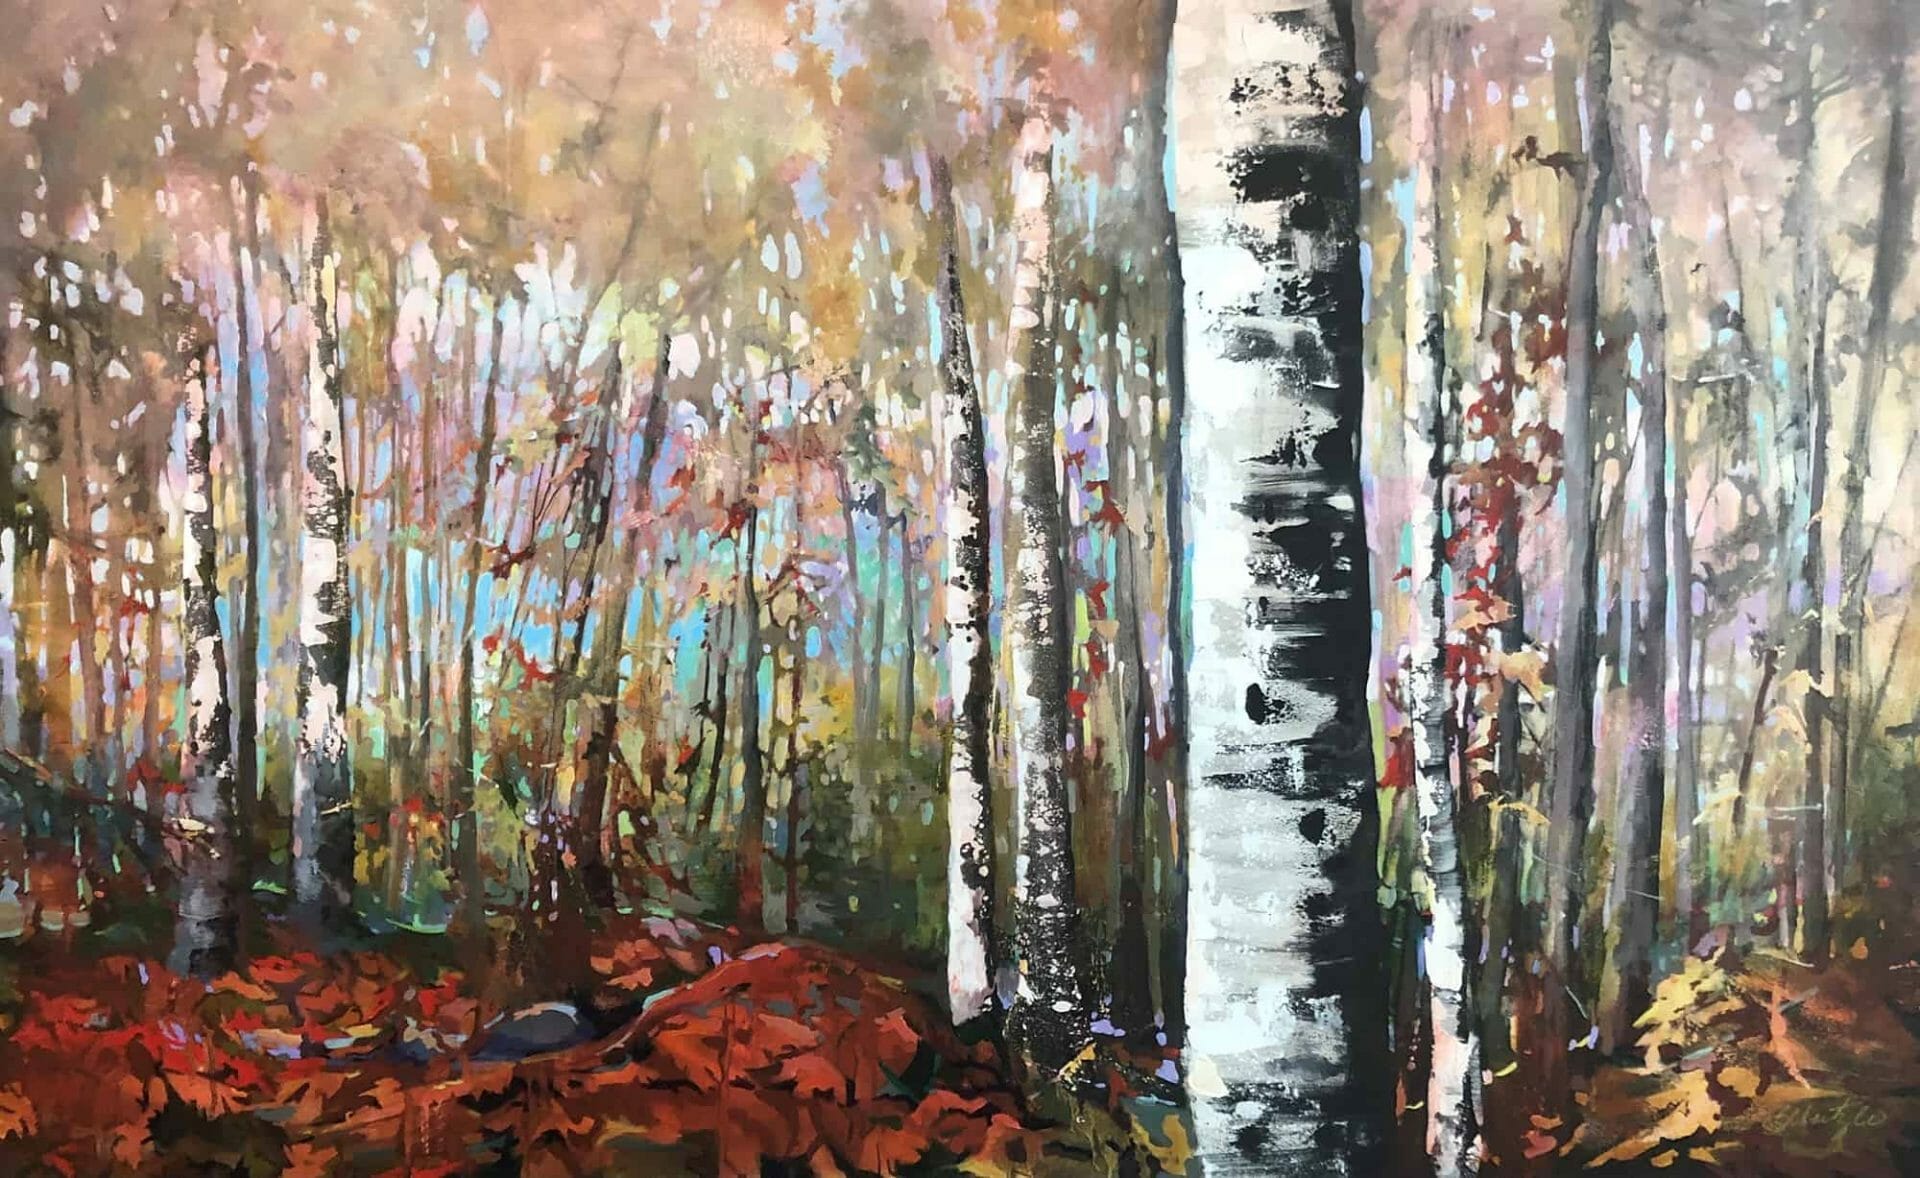 All the Colors, Past the Birch Tree - Canadian Original Artwork For Sale by Sheila Schaetzle - Calgary, AB Local Artist - Nature